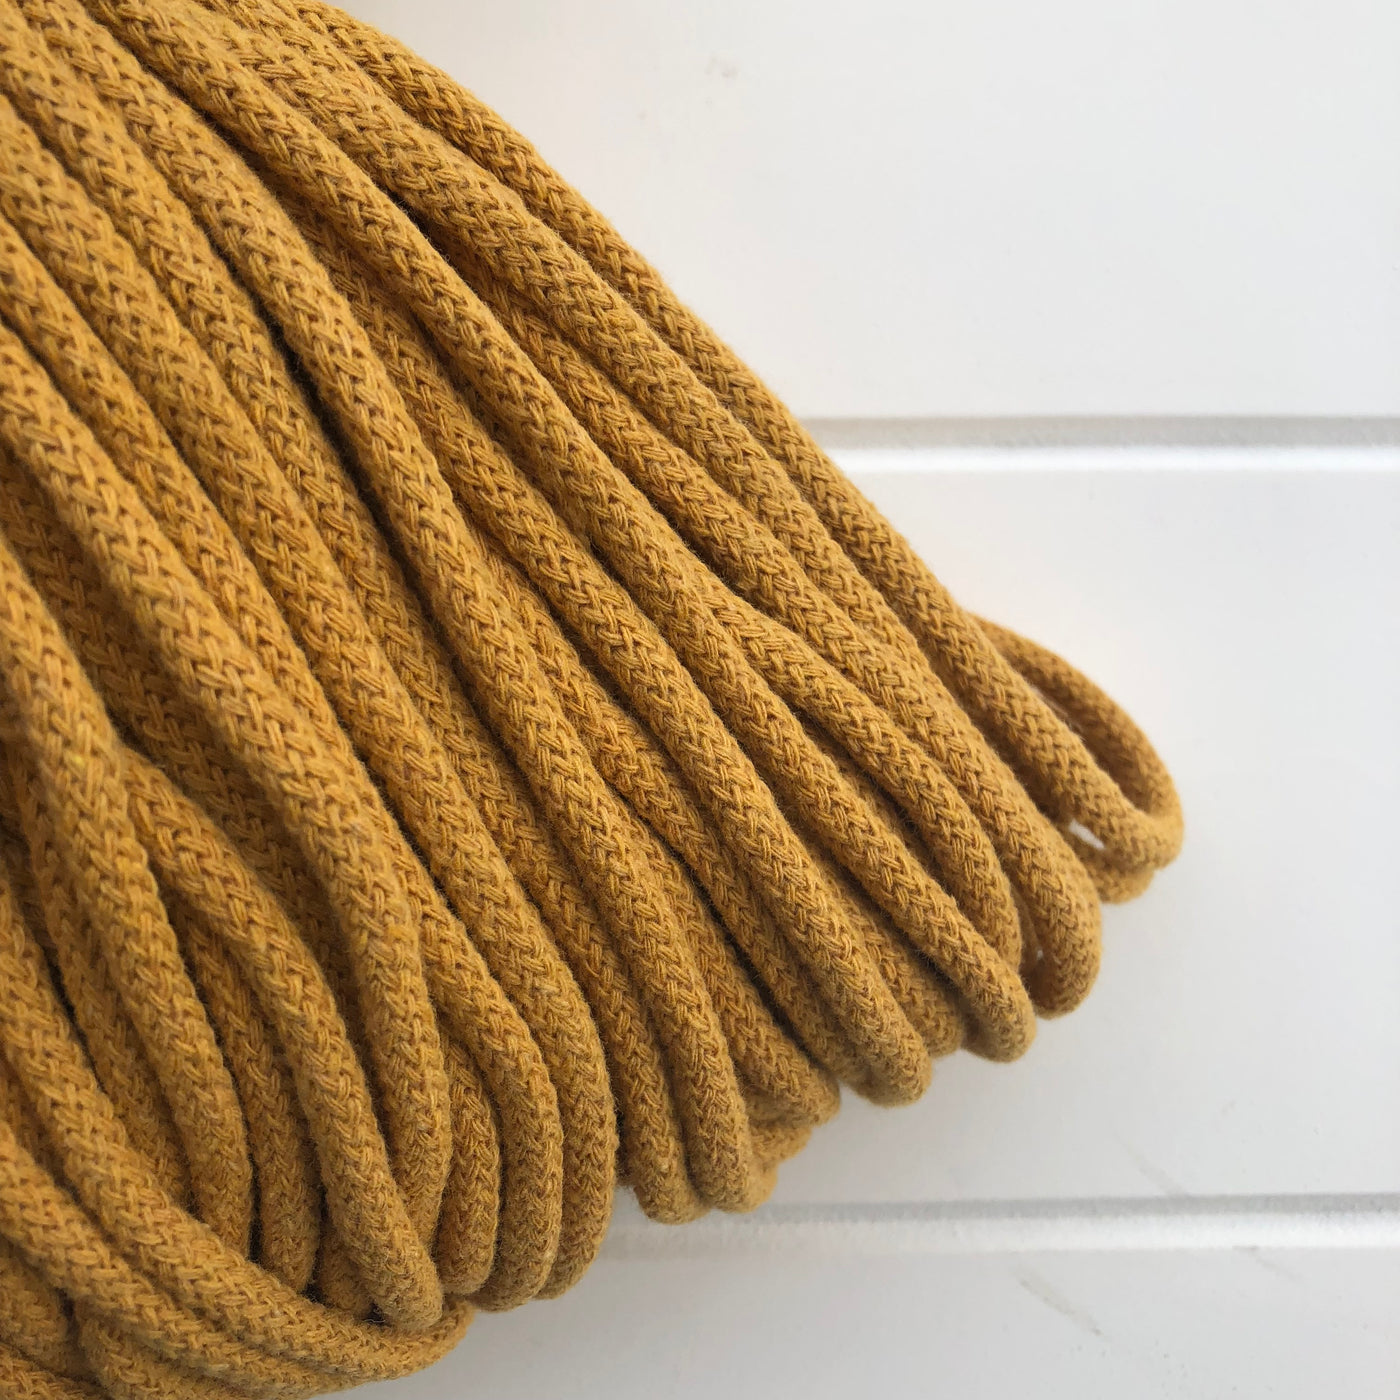 These beautiful Bobbiny ropes are made in Poland, and are non-toxic and certified safe for children, meeting certified worldwide textile standards.  5mm Diameter  100 metres Length  Recommended for use with 10-12mm crochet or knitting needles  Cotton inner and outer layers, perfect for use with Macrame, Crochet or Knitting